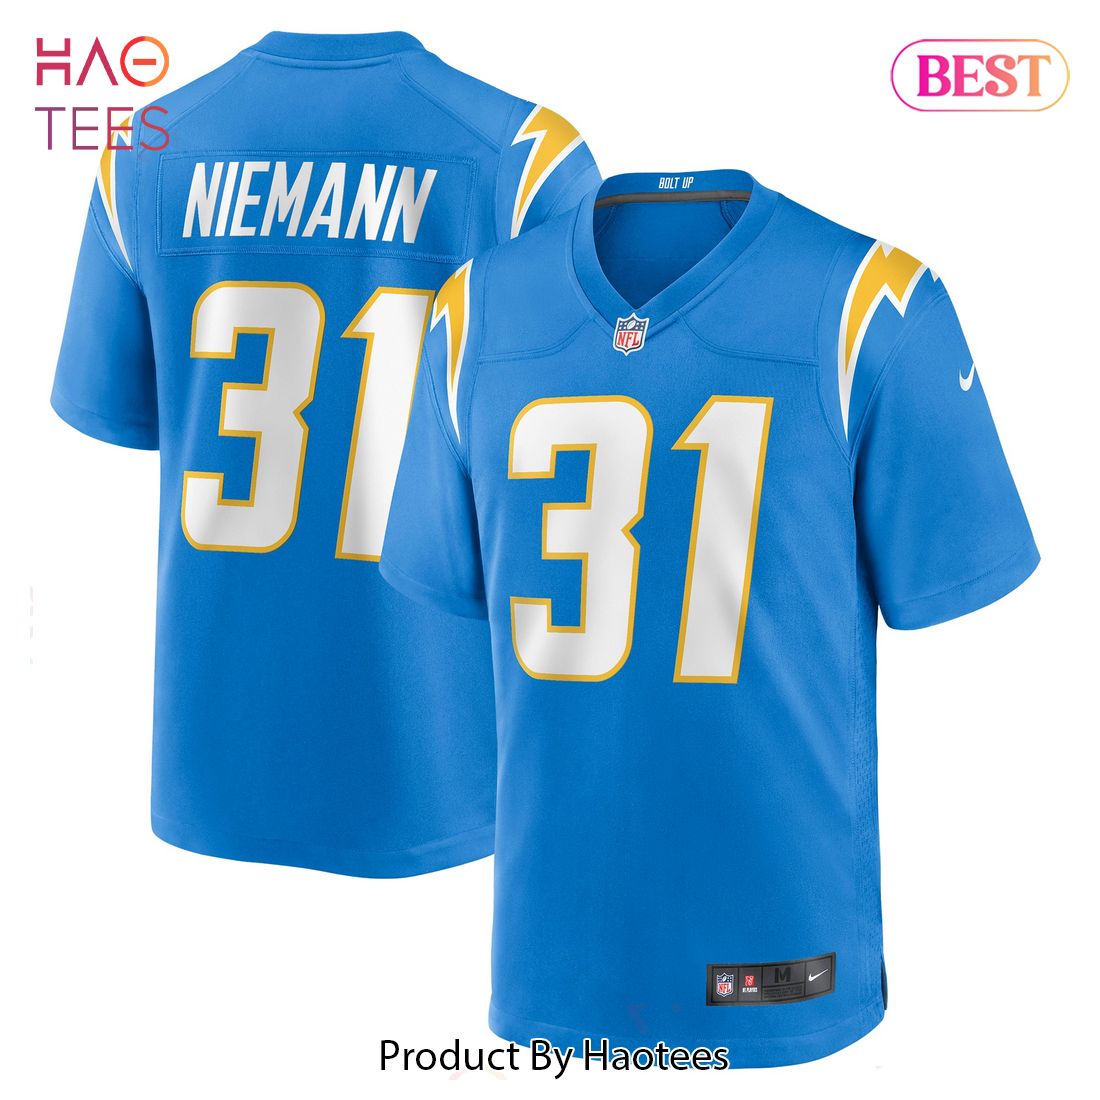 Nick Niemann Los Angeles Chargers Nike Game Player Jersey Powder Blue